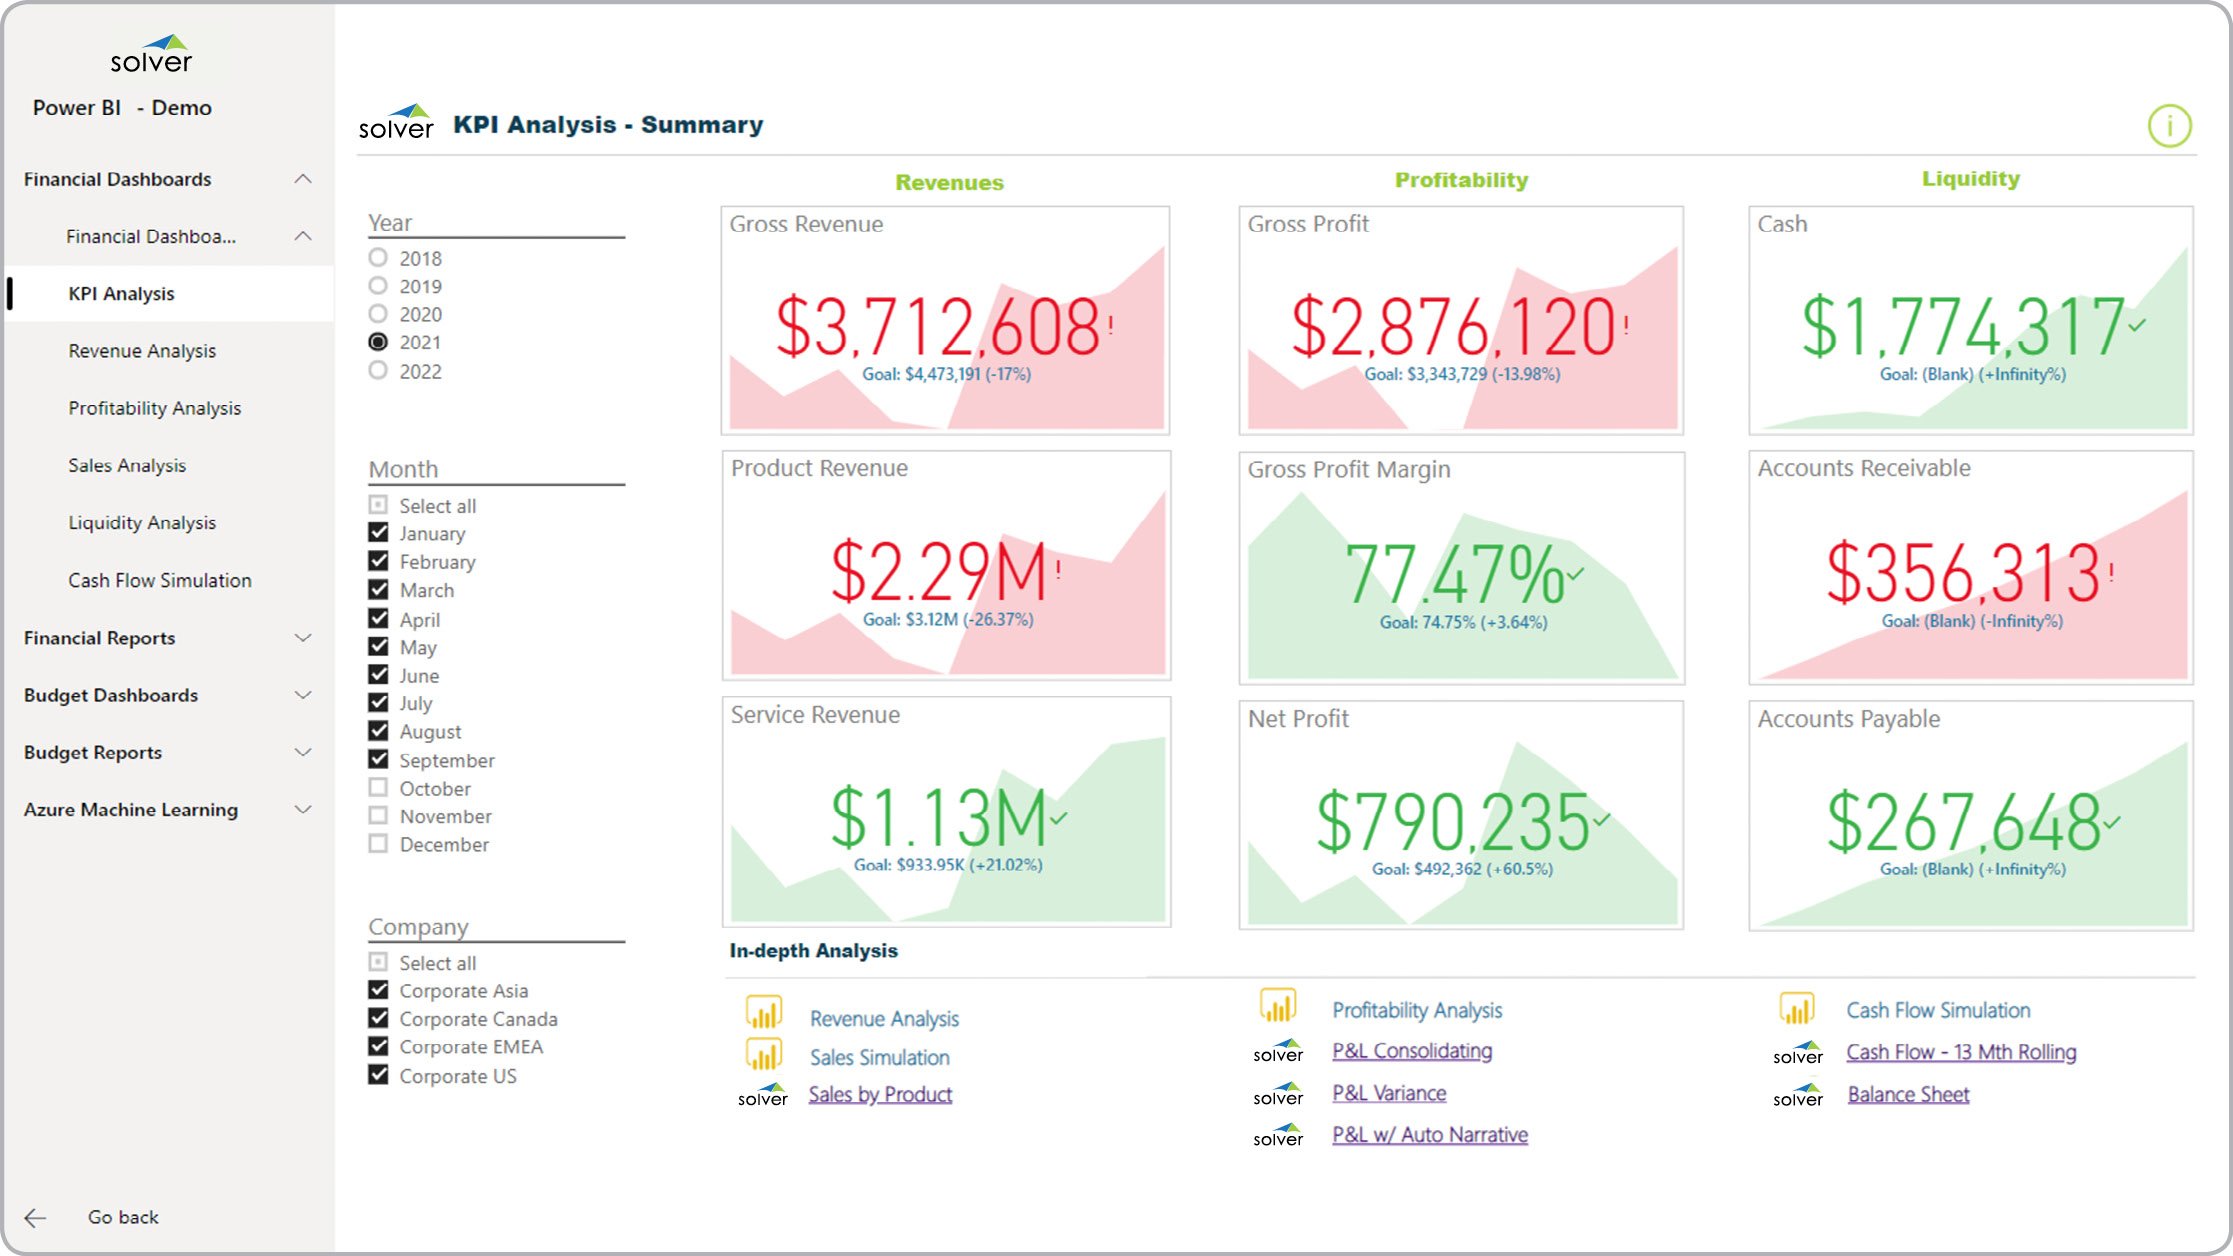 Power BI dashboard with financial KPIs and direct links to financial reports in Solver.